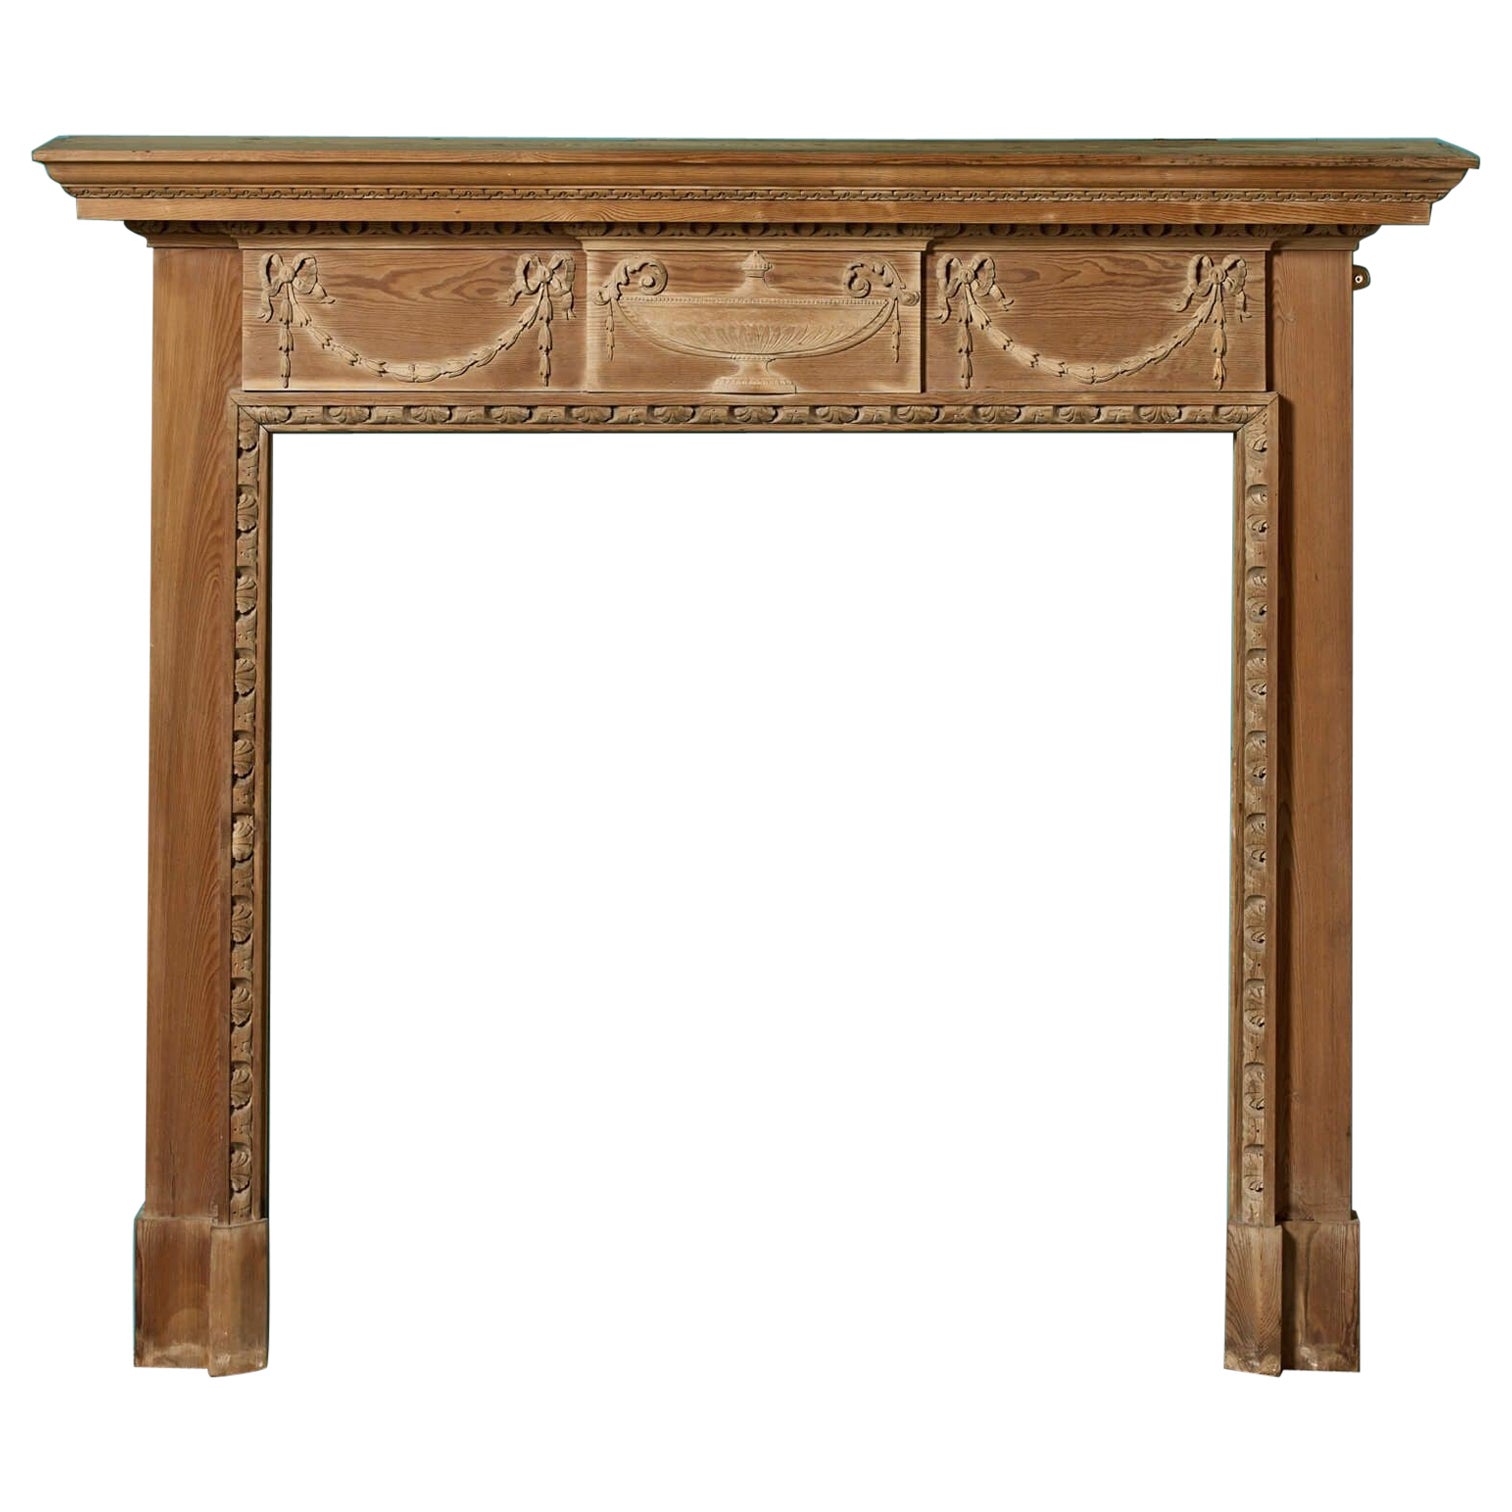 Neoclassical Style Antique Wooden Fire Mantel For Sale